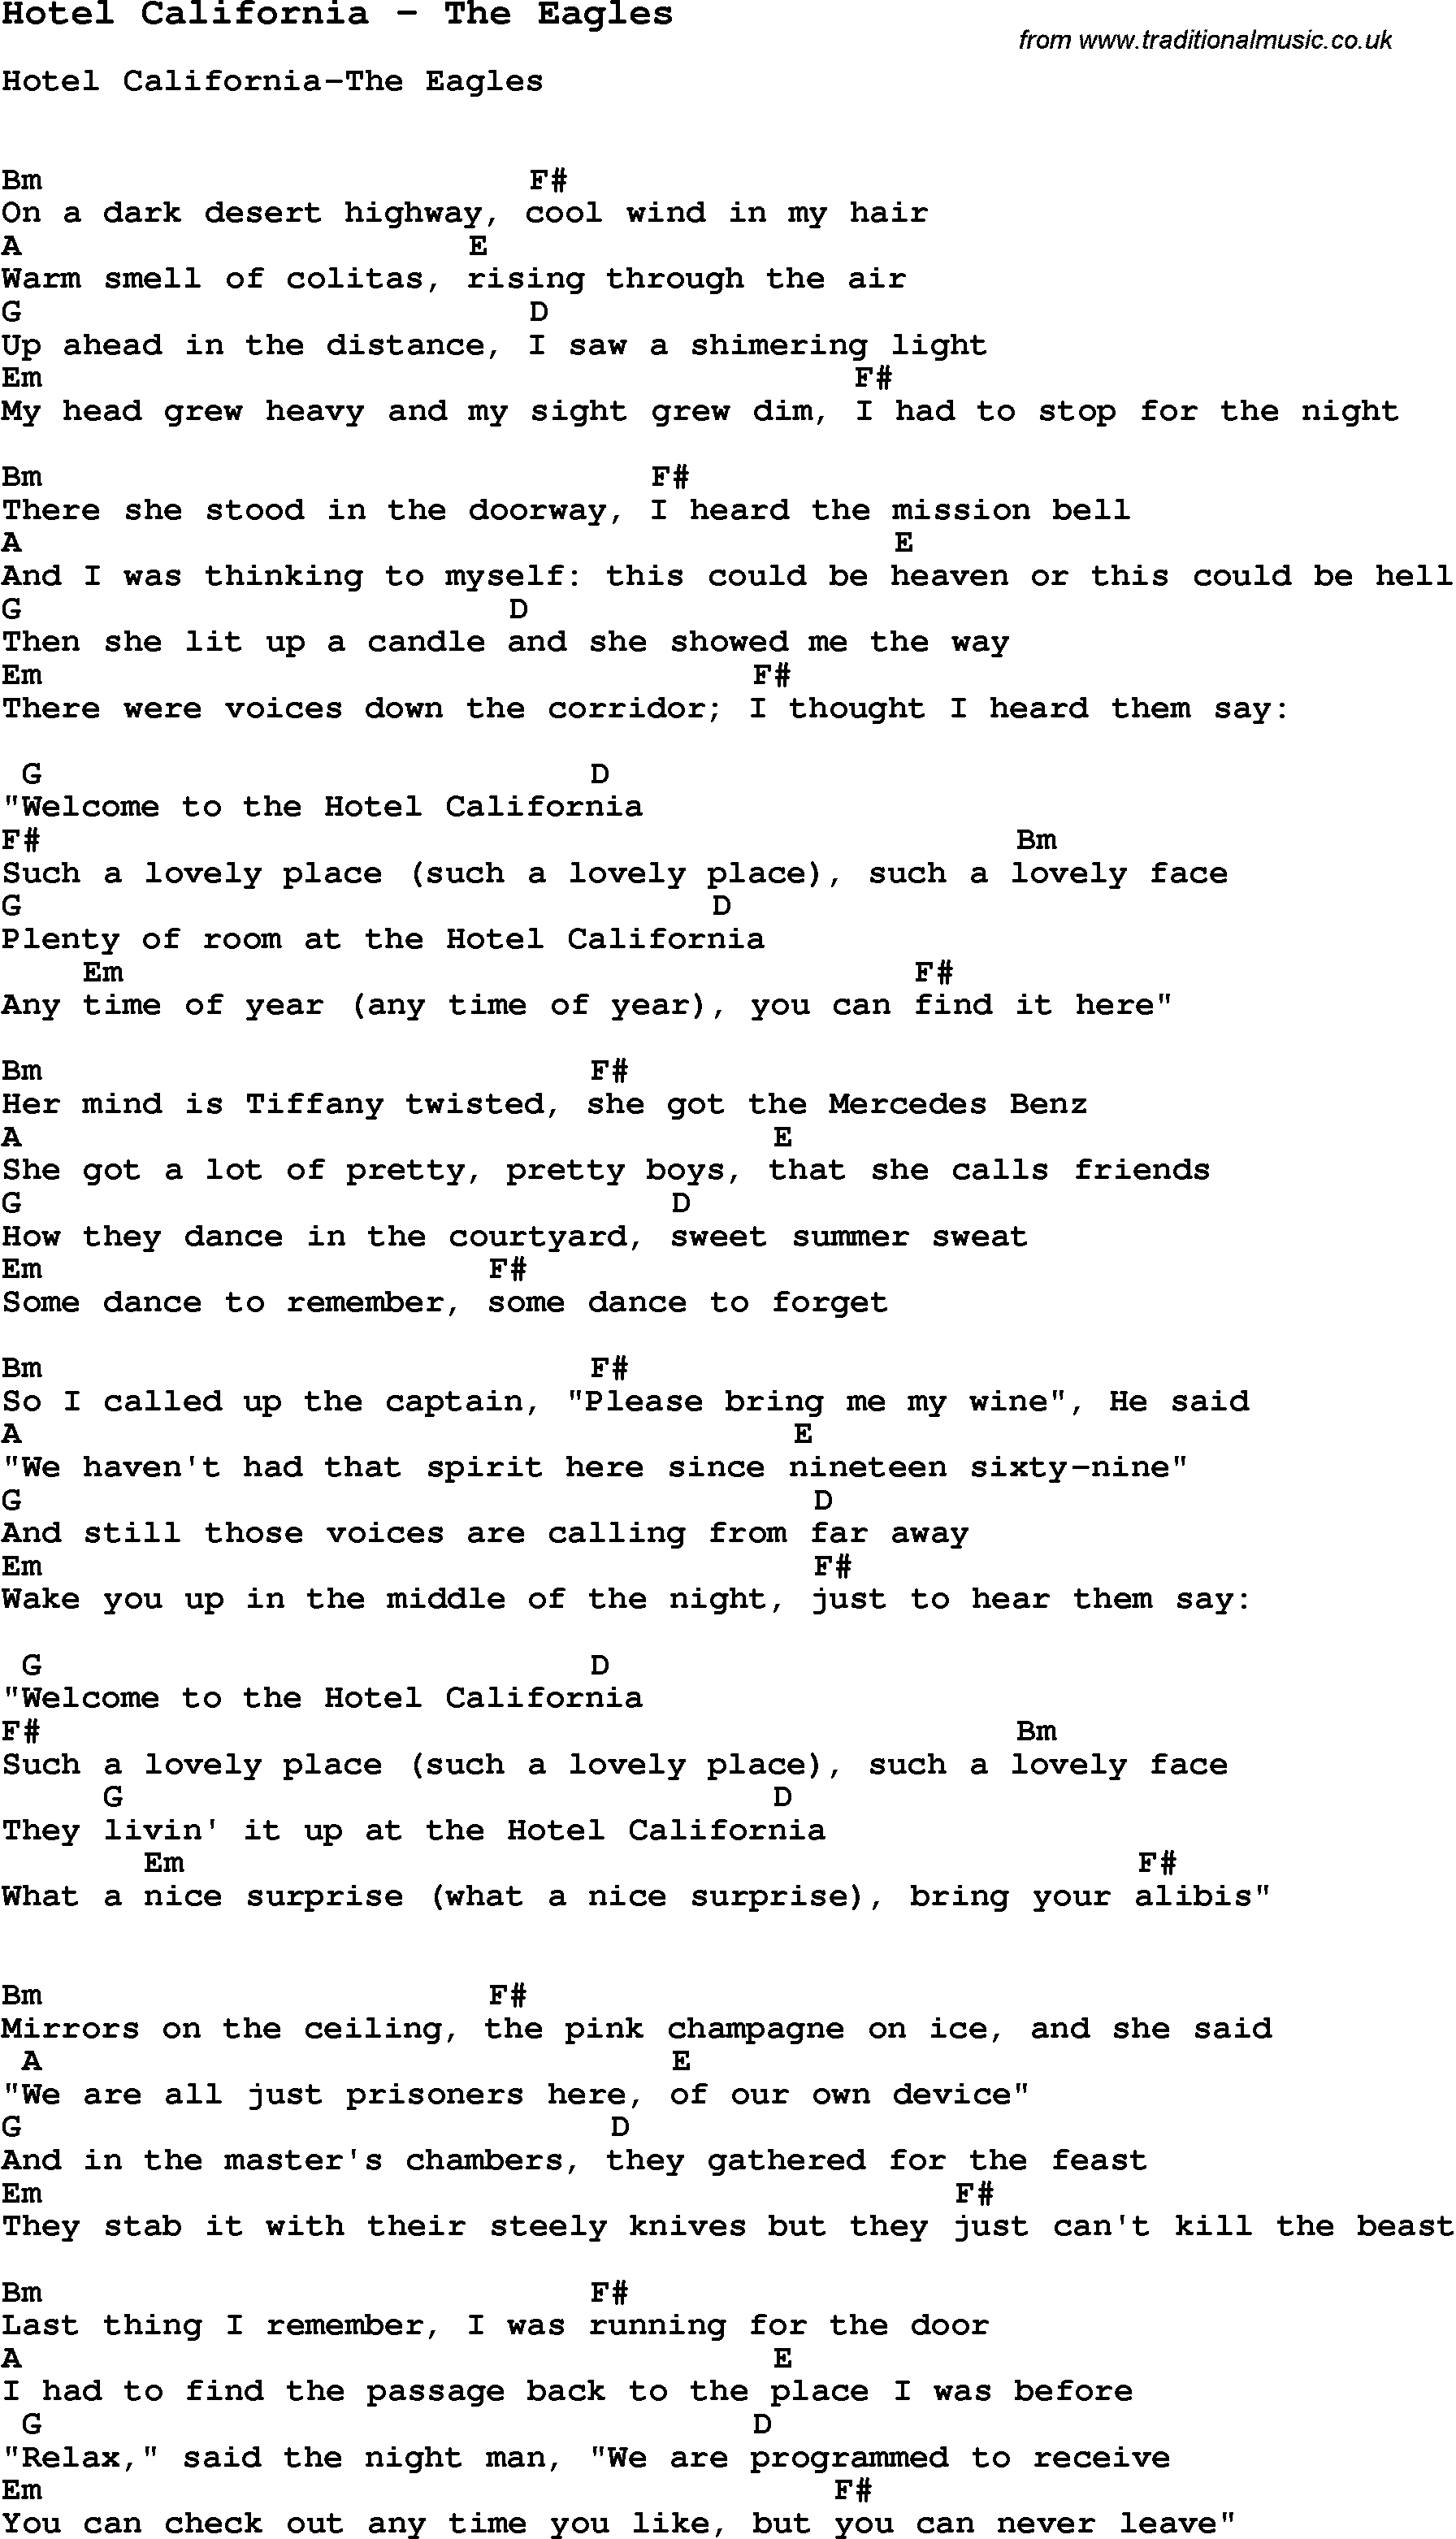 Hotel California Chords Song Hotel California The Eagles Song Lyric For Vocal